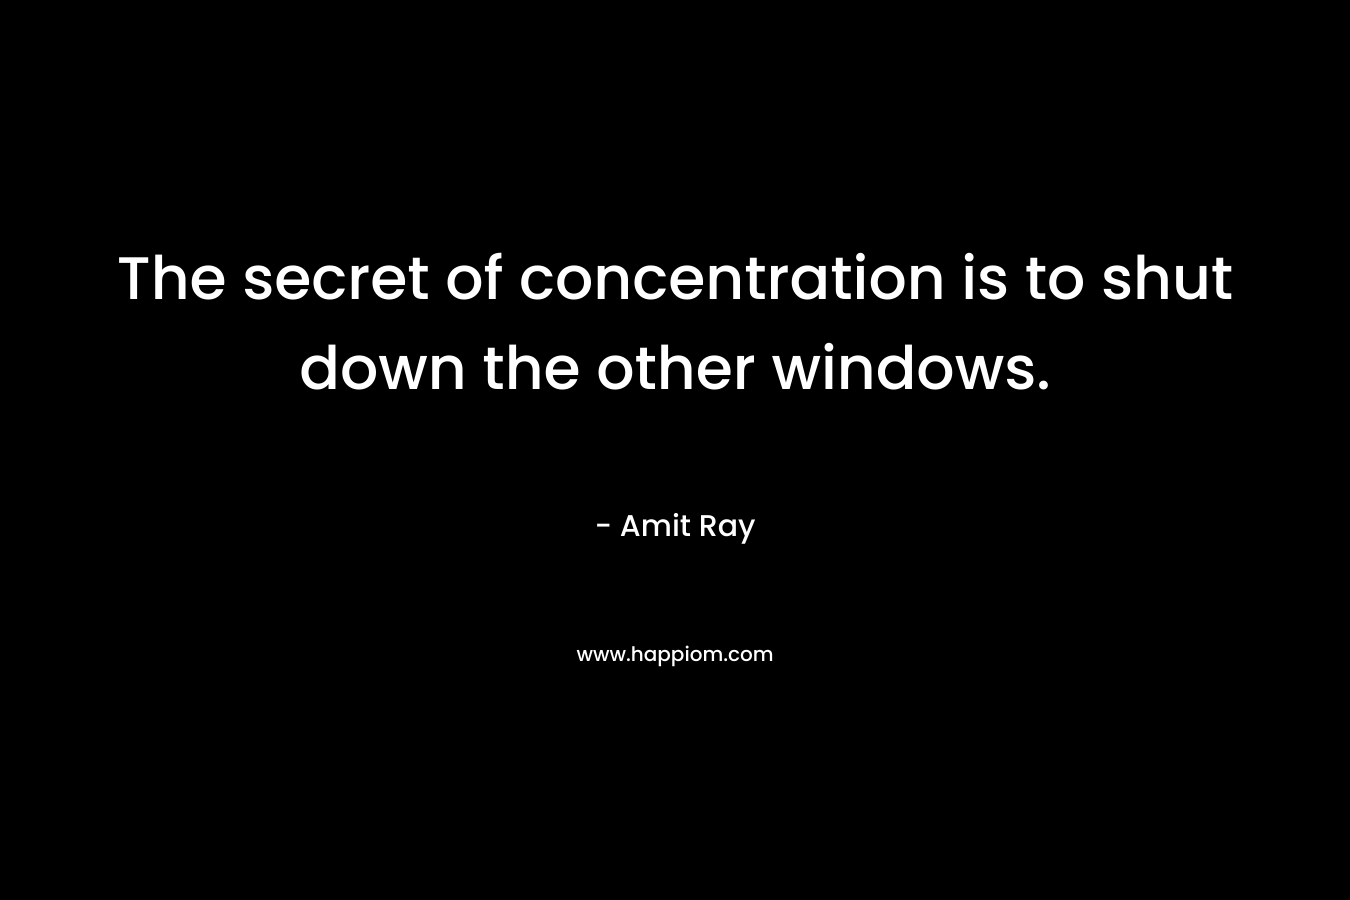 The secret of concentration is to shut down the other windows. – Amit Ray